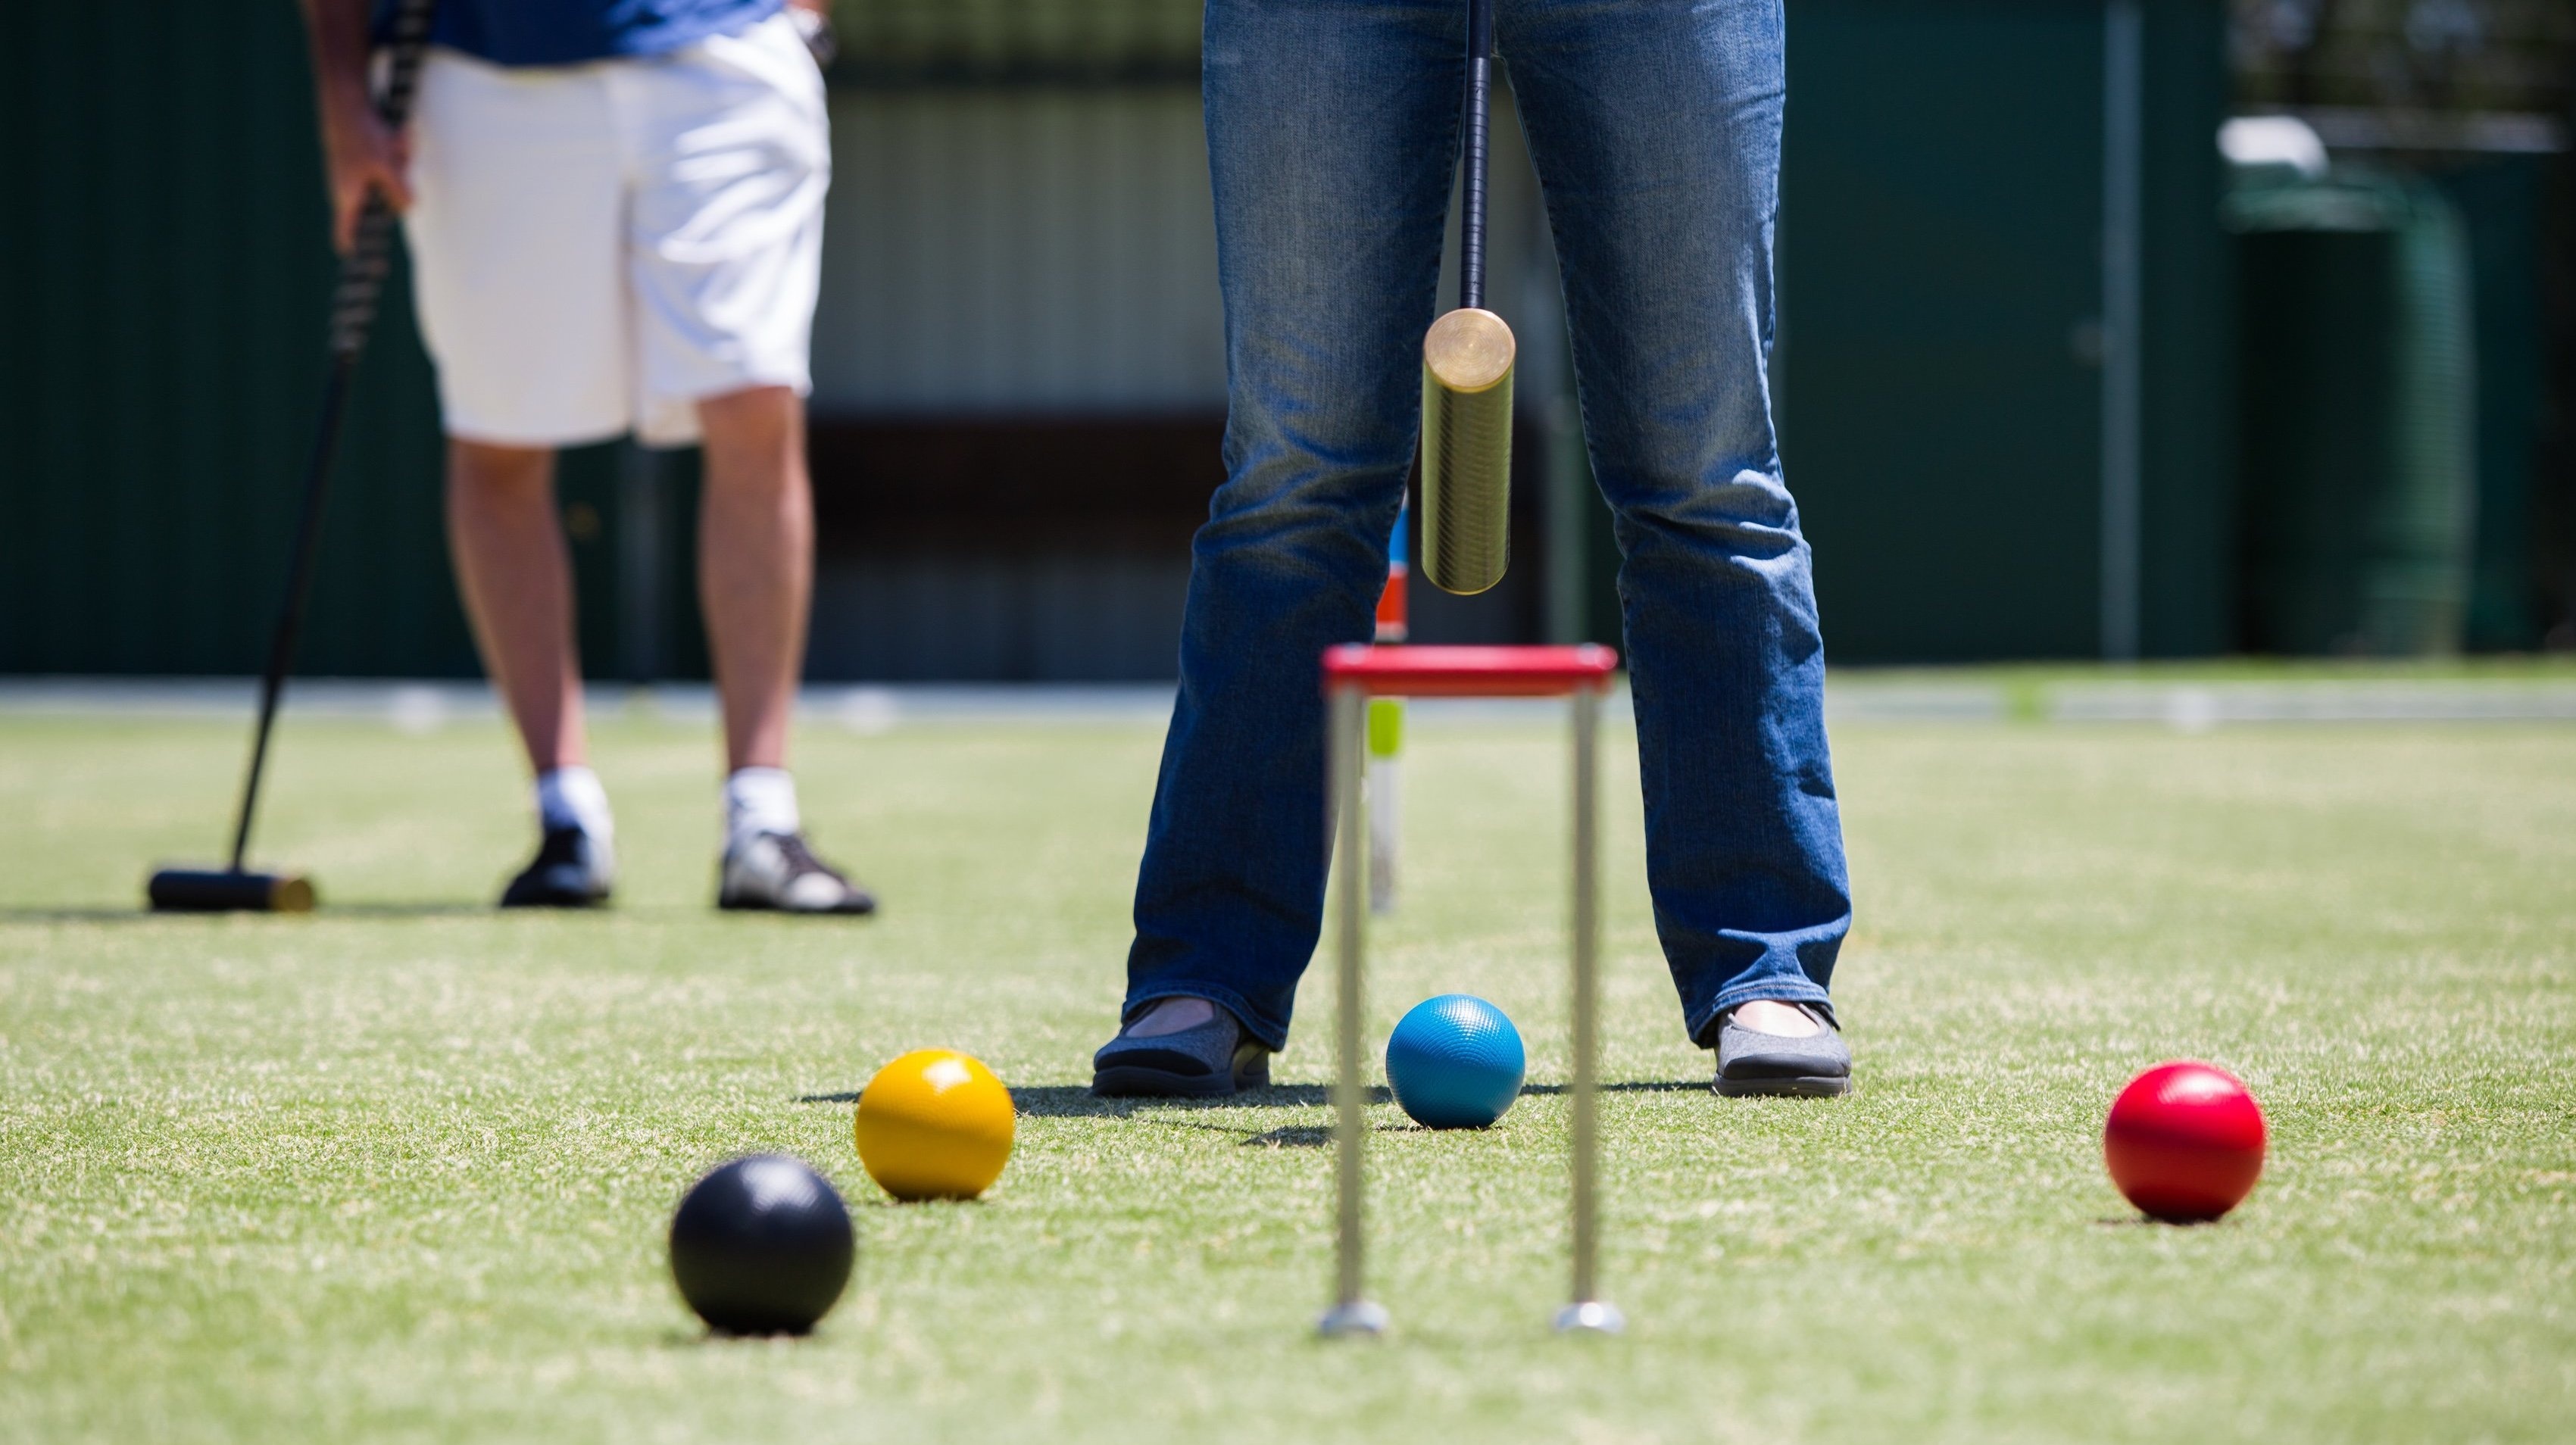 Croquet: The player picks up his own ball and puts it down next to the ball that it hit. 3410x1910 HD Background.